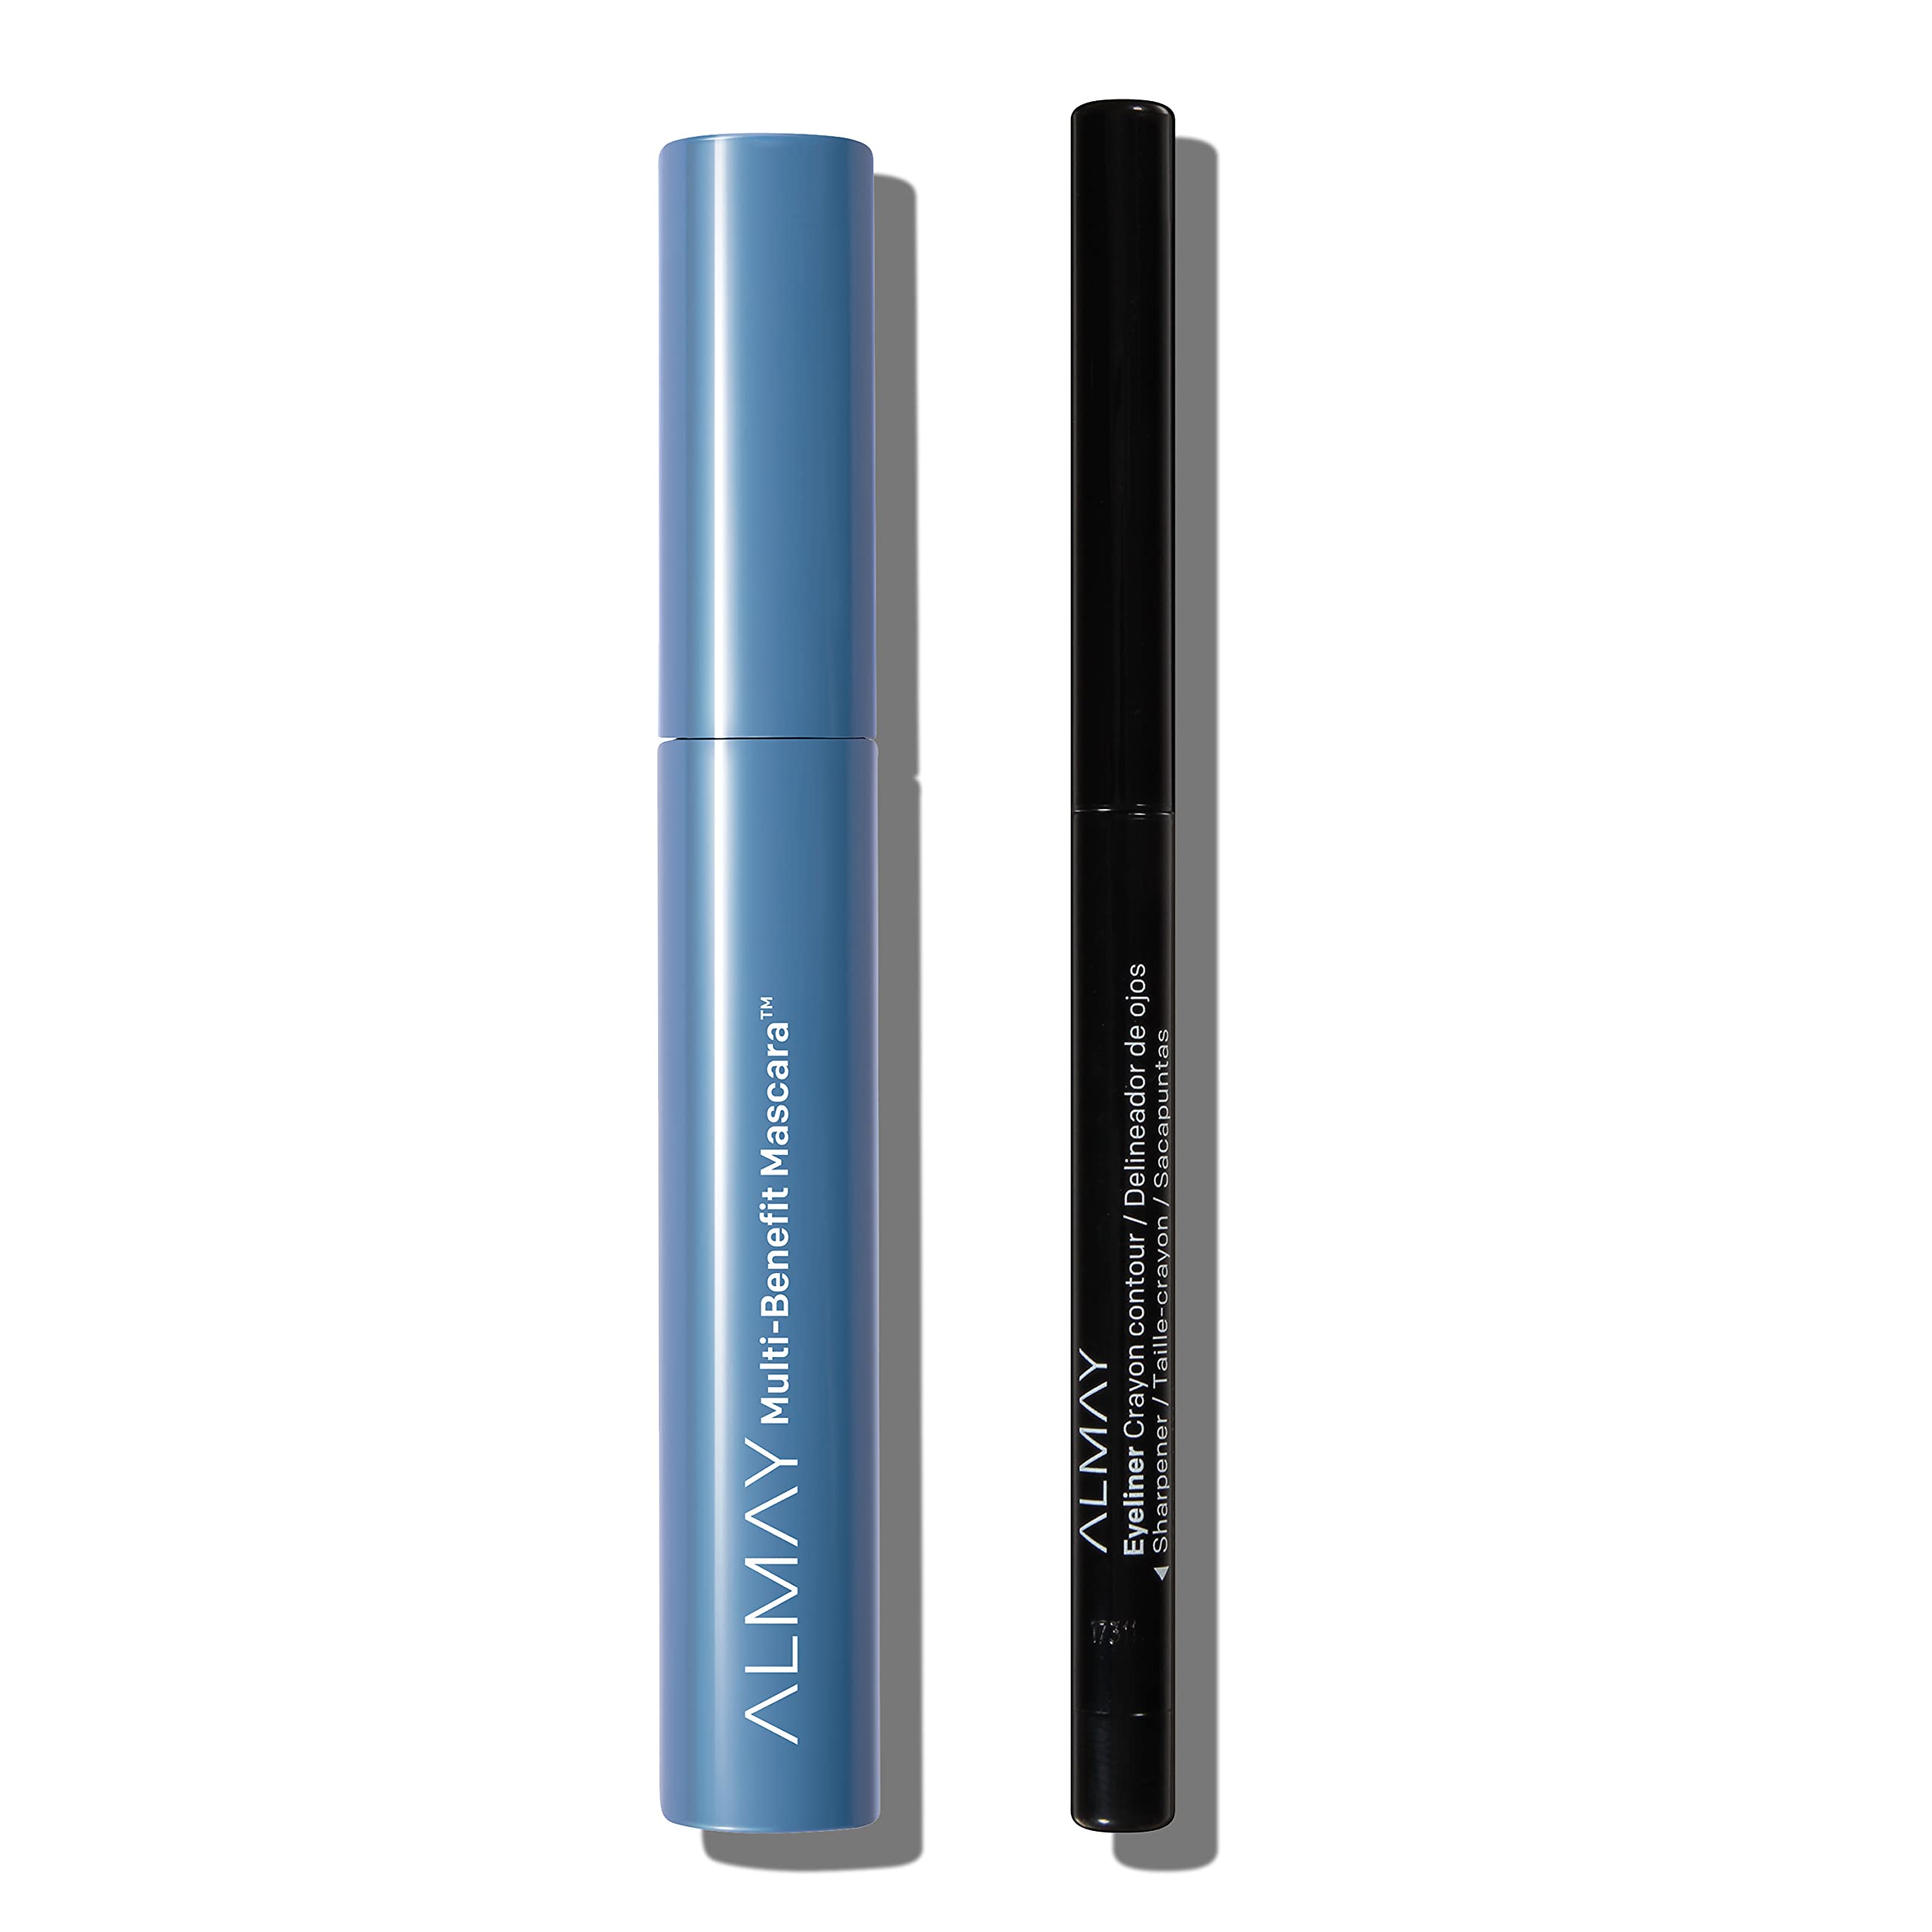 Almay Multi-Benefit Mascara and Eyeliner Duo Value Pack (Black) $3.29 + Free Shipping w/ Prime